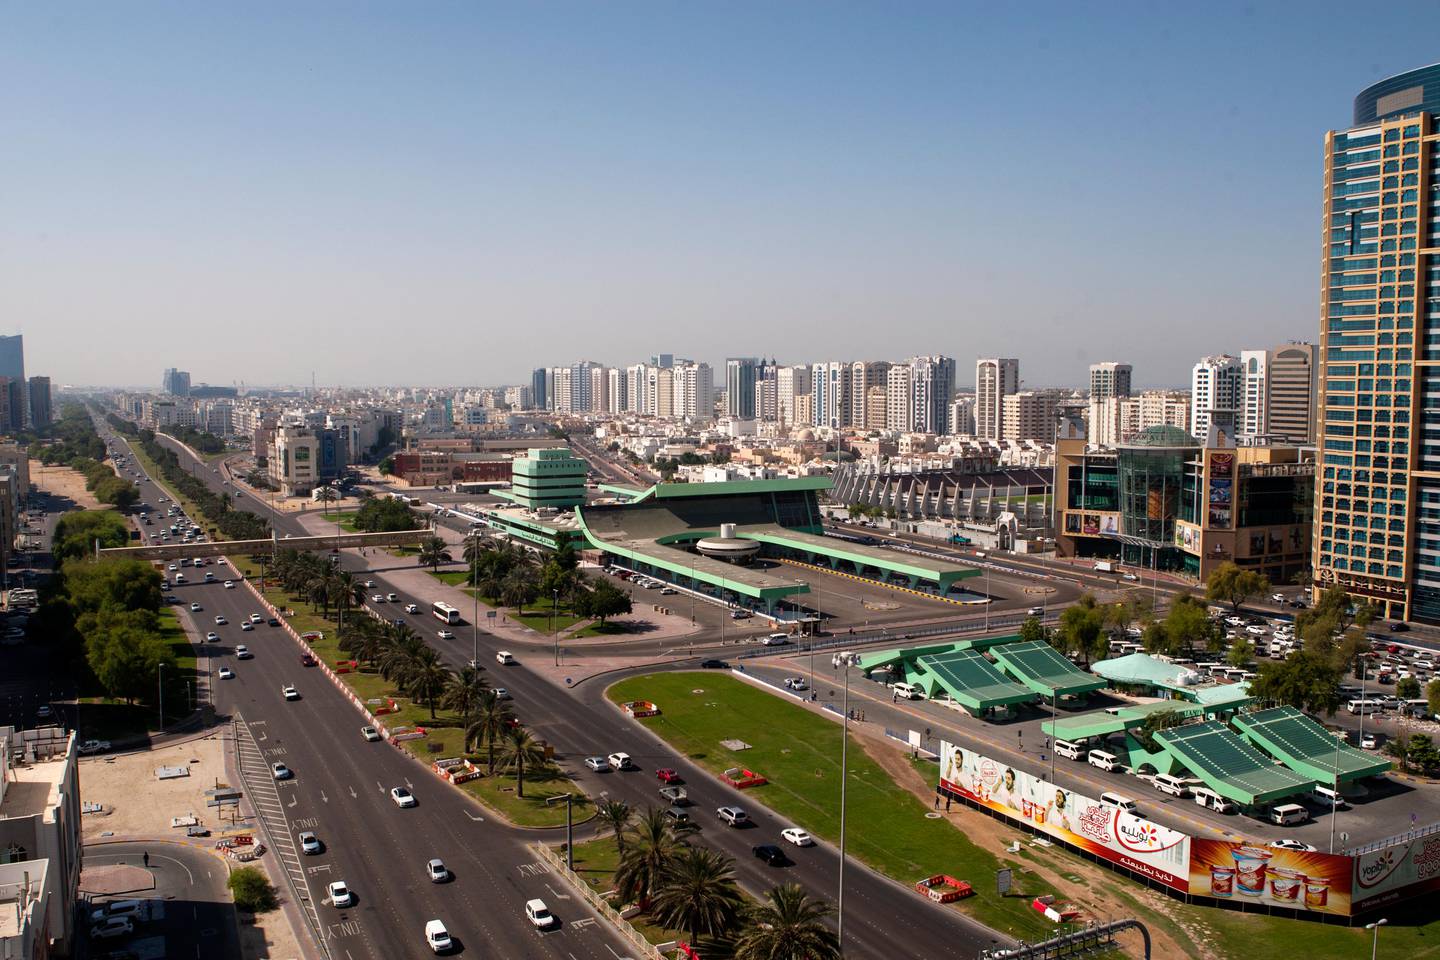 Abu Dhabi, United Arab Emirates, June 17, 2014:     General view of the Main Bus Terminal in Abu Dhabi on June 17, 2014. Christopher Pike / The National

Reporter:  N/A
Section: News
Keywords: traffic, cars, crosswalk, blocked, zebra crossing

